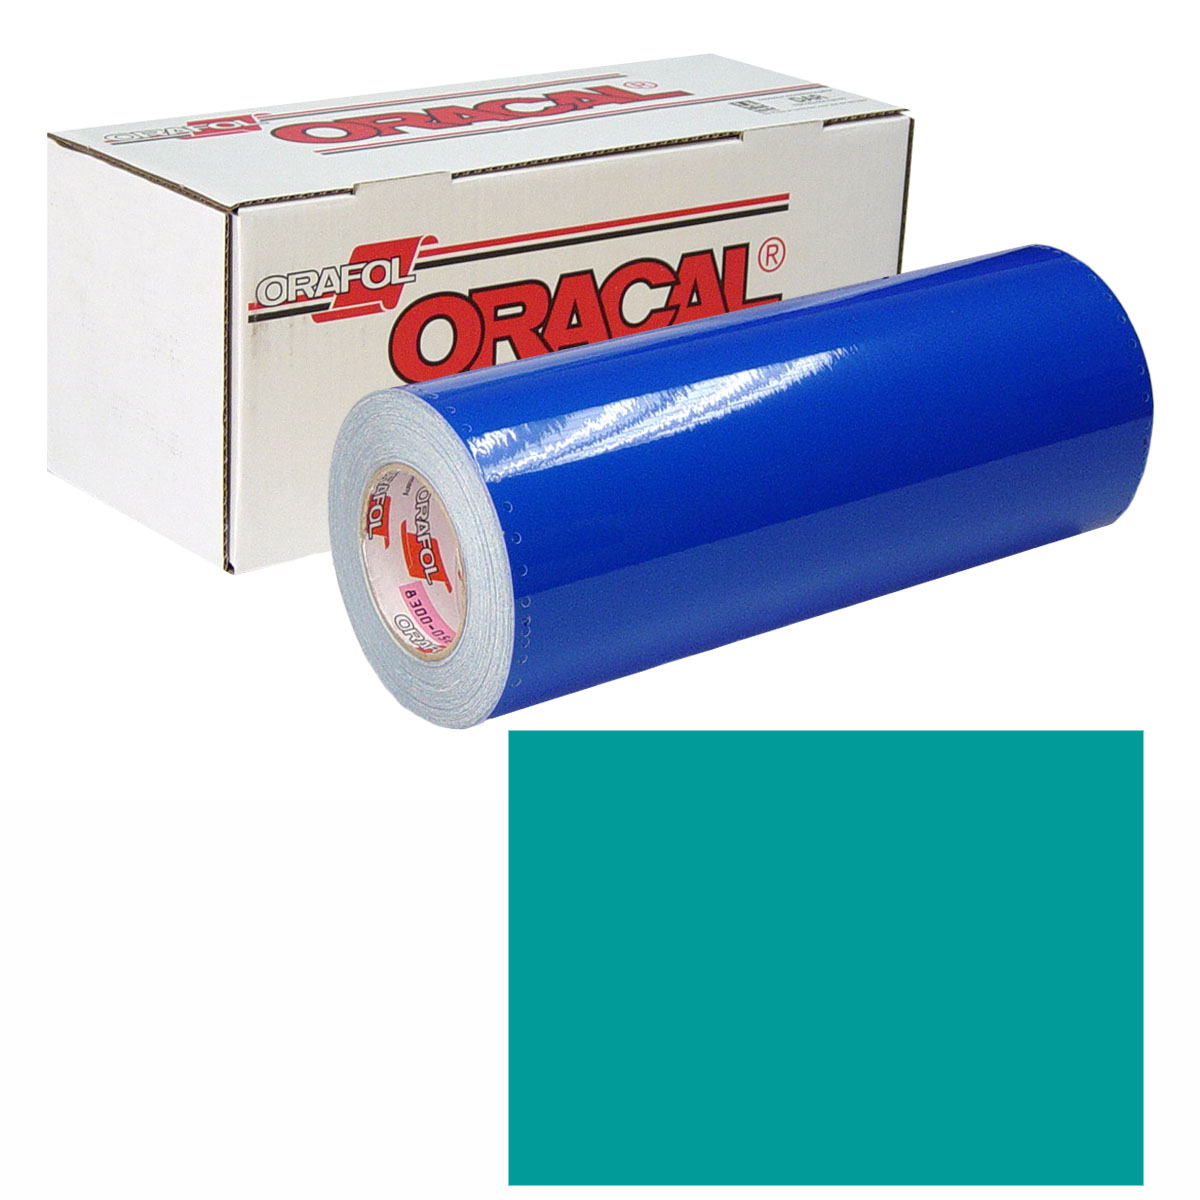 ORACAL 631 30in X 10yd 054 Turquoise